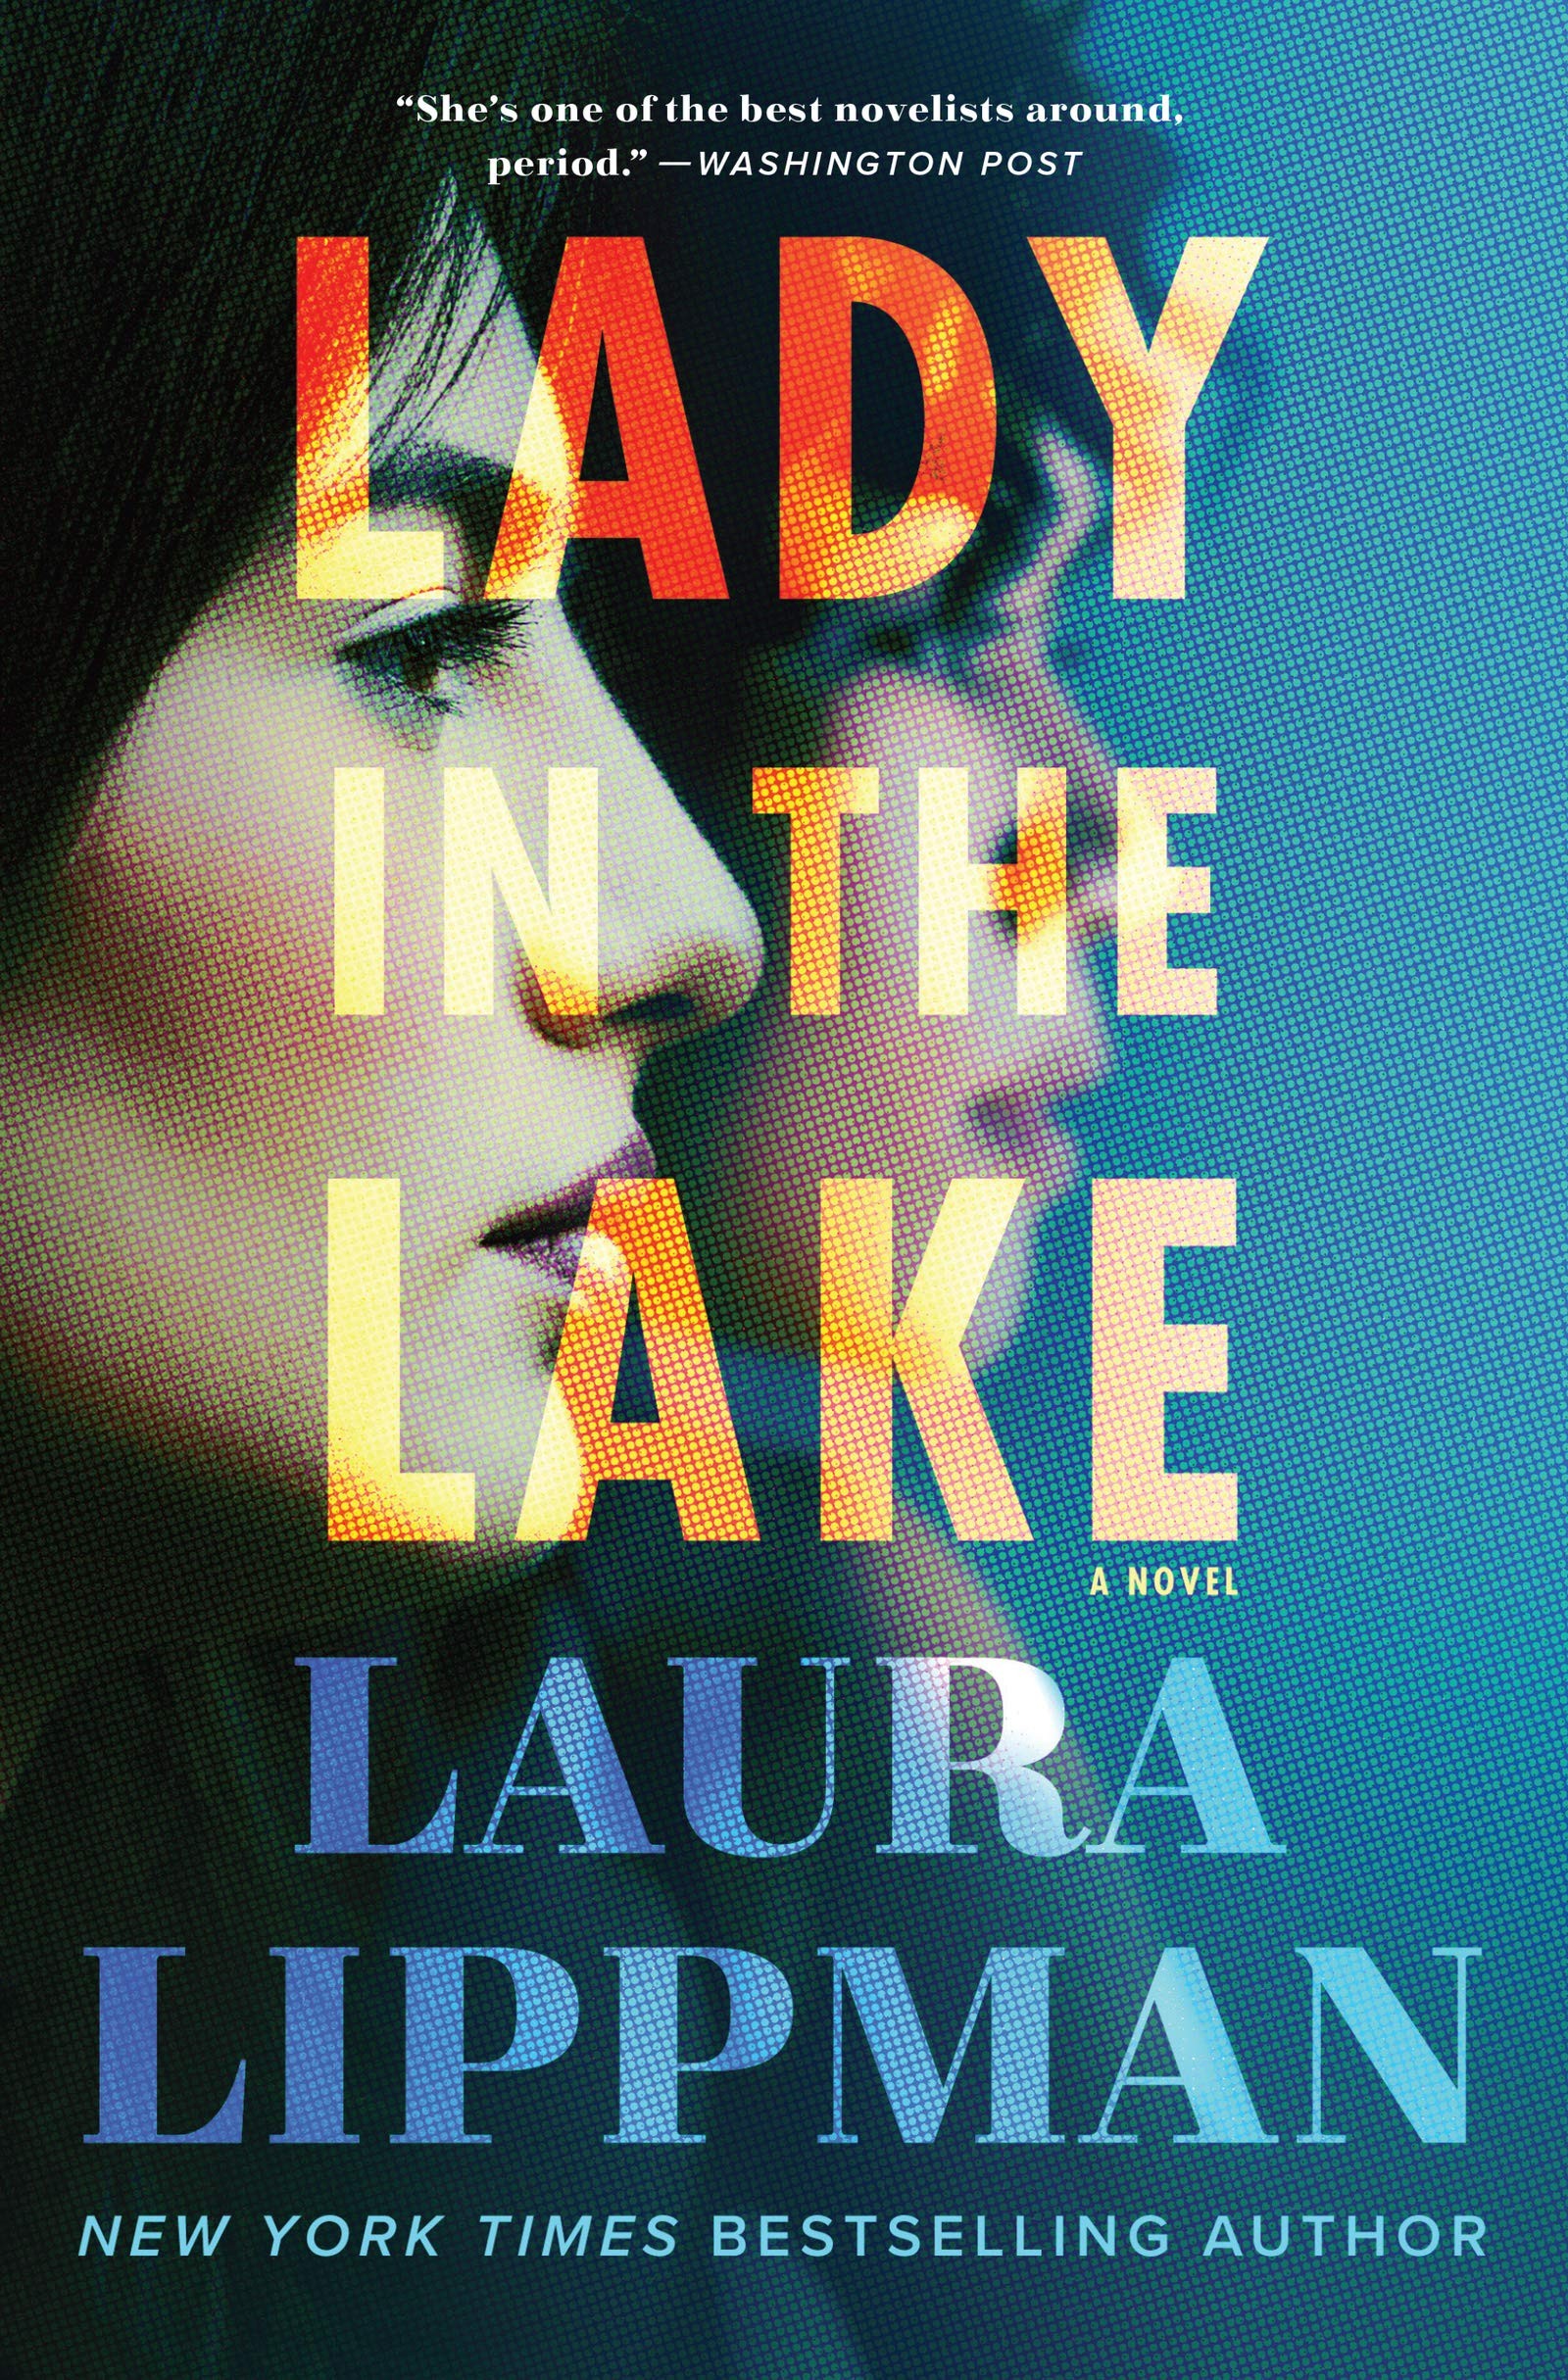 Cover of the book by Laura Lippman on which the Lady in the Lake series is based (Photo: Disclosure)